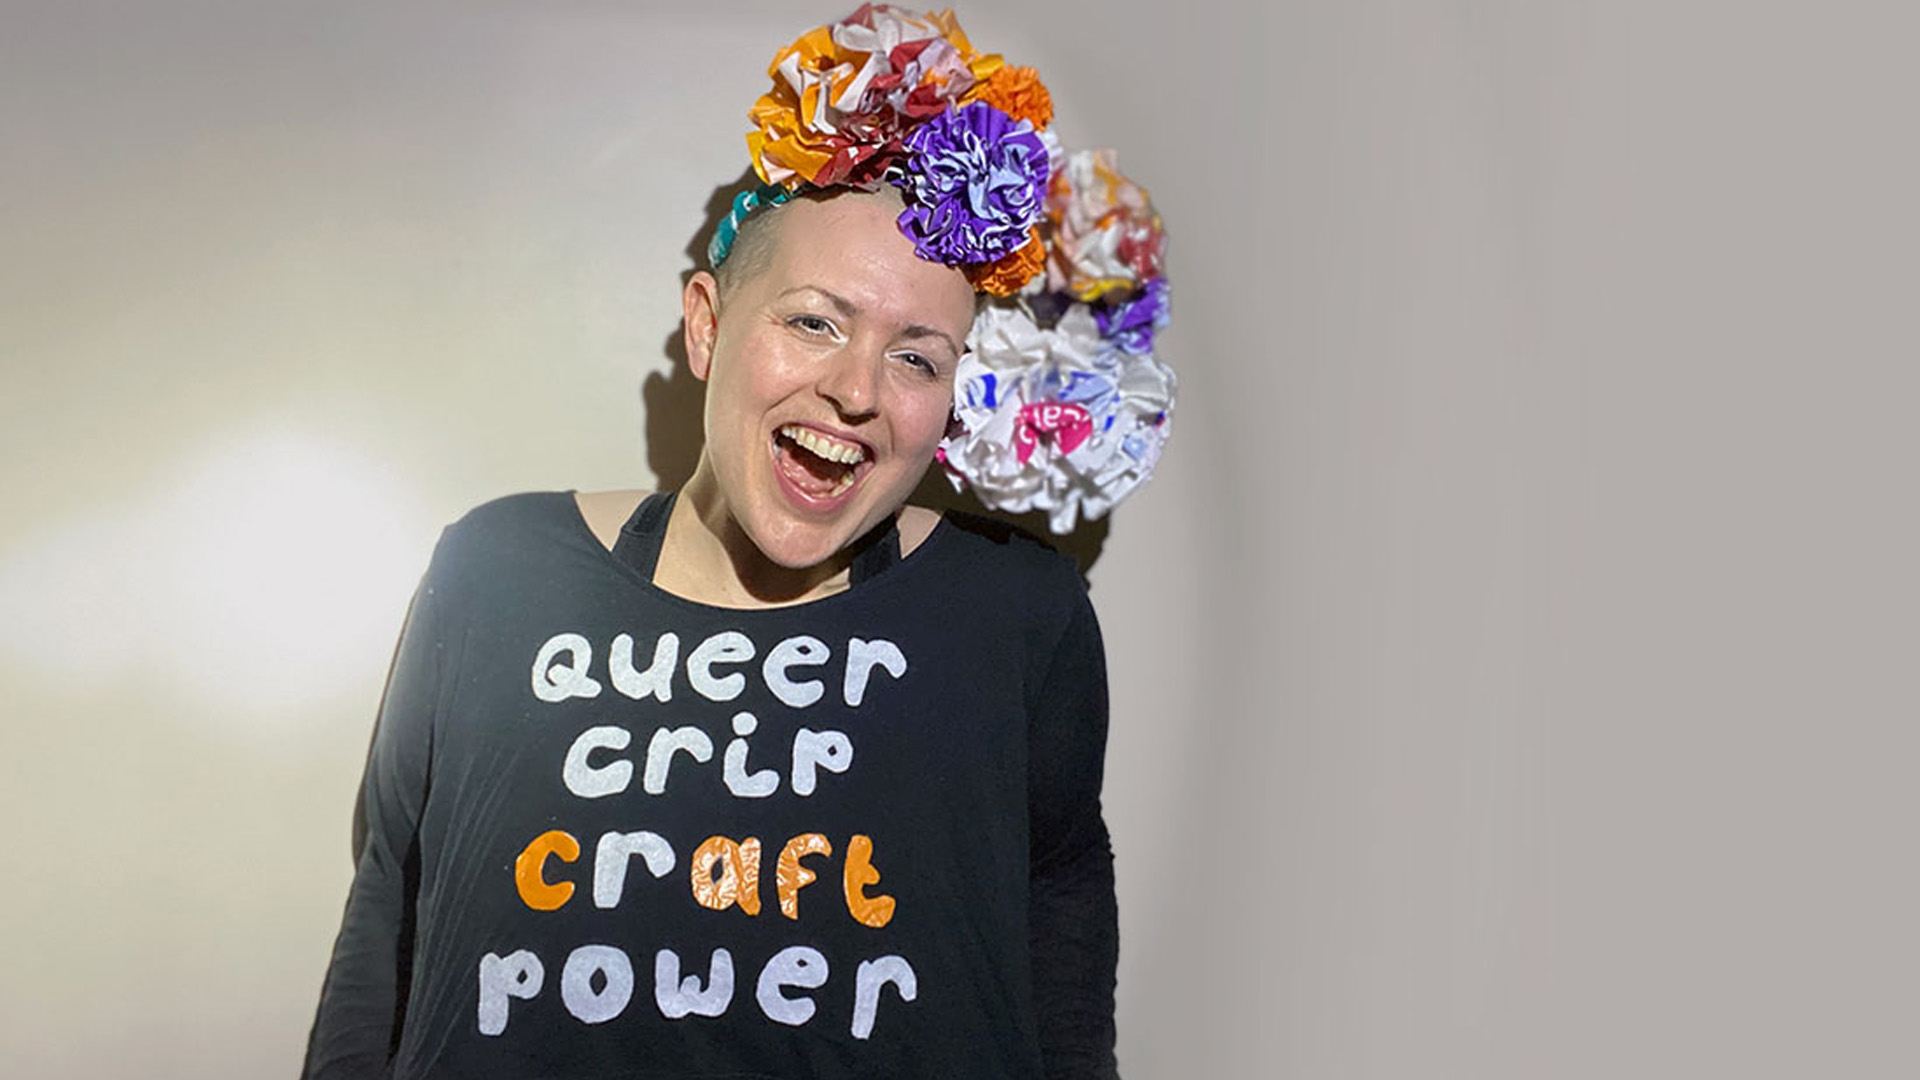 Colour photo, interior. Kitt, white shaven headed human with a big smile wears a headdress made of huge multi coloured flowers and a black long sleeved shirt on which white and orange text reads “queer crip craft power”.